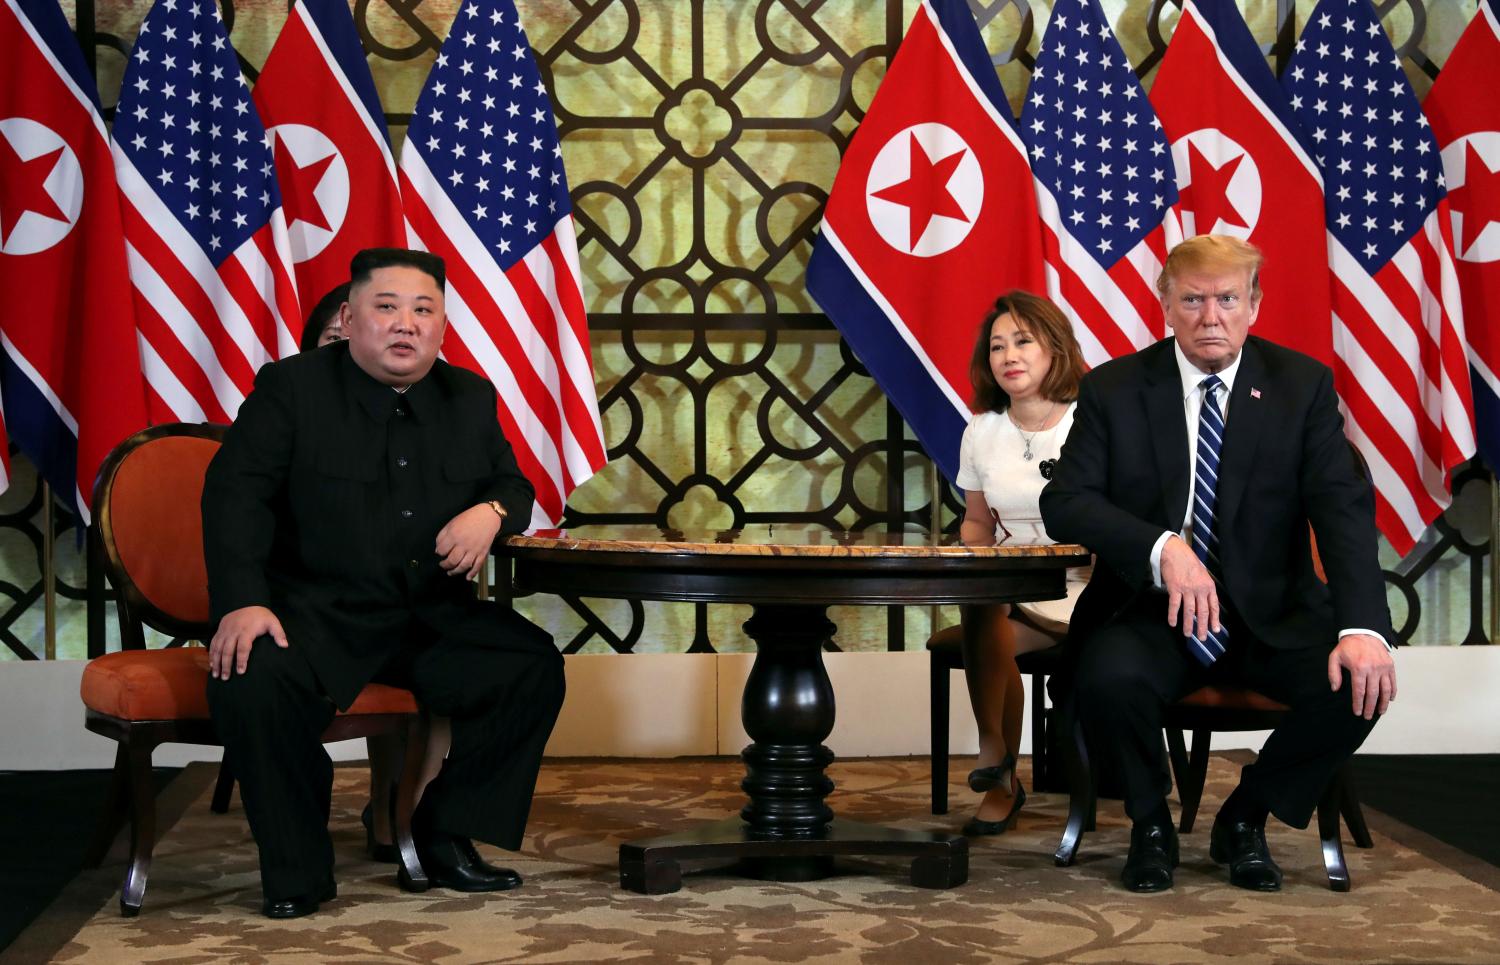 FILE PHOTO: North Korean leader Kim Jong Un and U.S. President Donald Trump listen to questions from the media during their one-on-one bilateral meeting at the second North Korea-U.S. summit in the Metropole hotel in Hanoi, Vietnam February 28, 2019. REUTERS/Leah Millis/File Photo - RC1CA46BF930